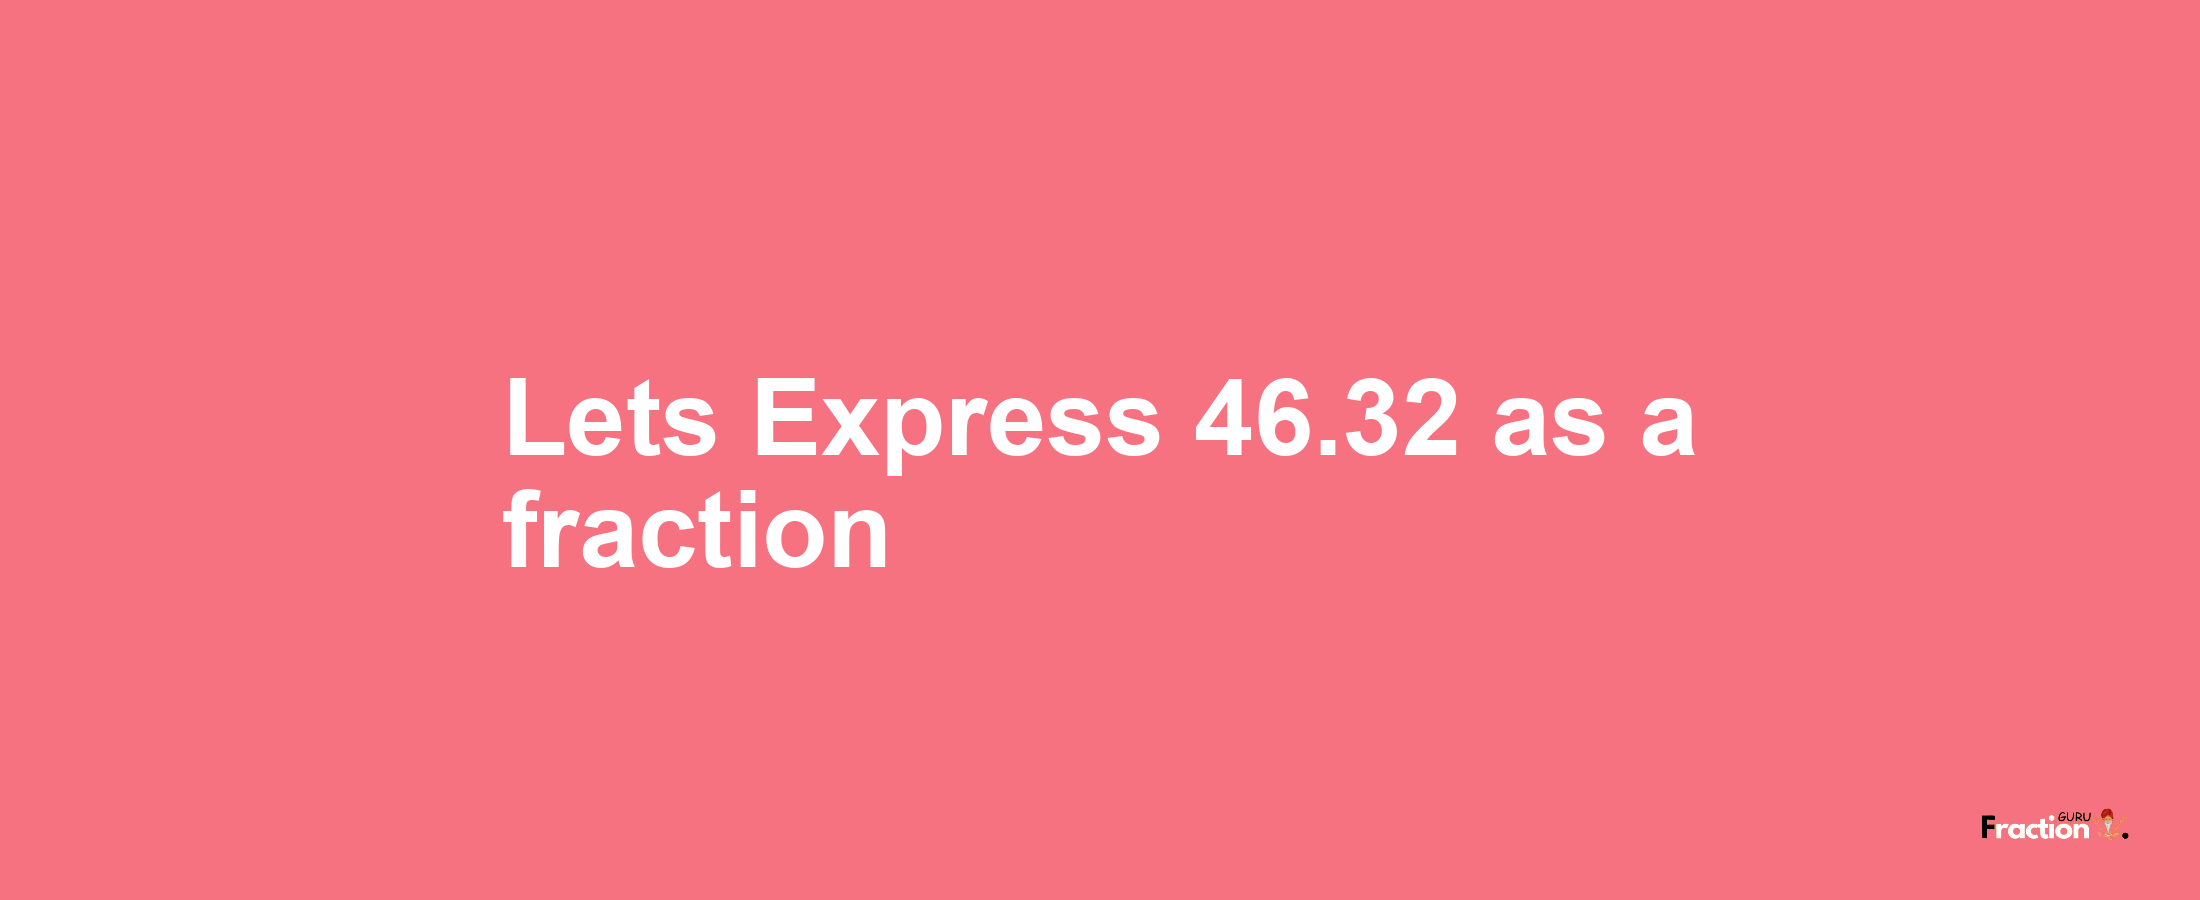 Lets Express 46.32 as afraction